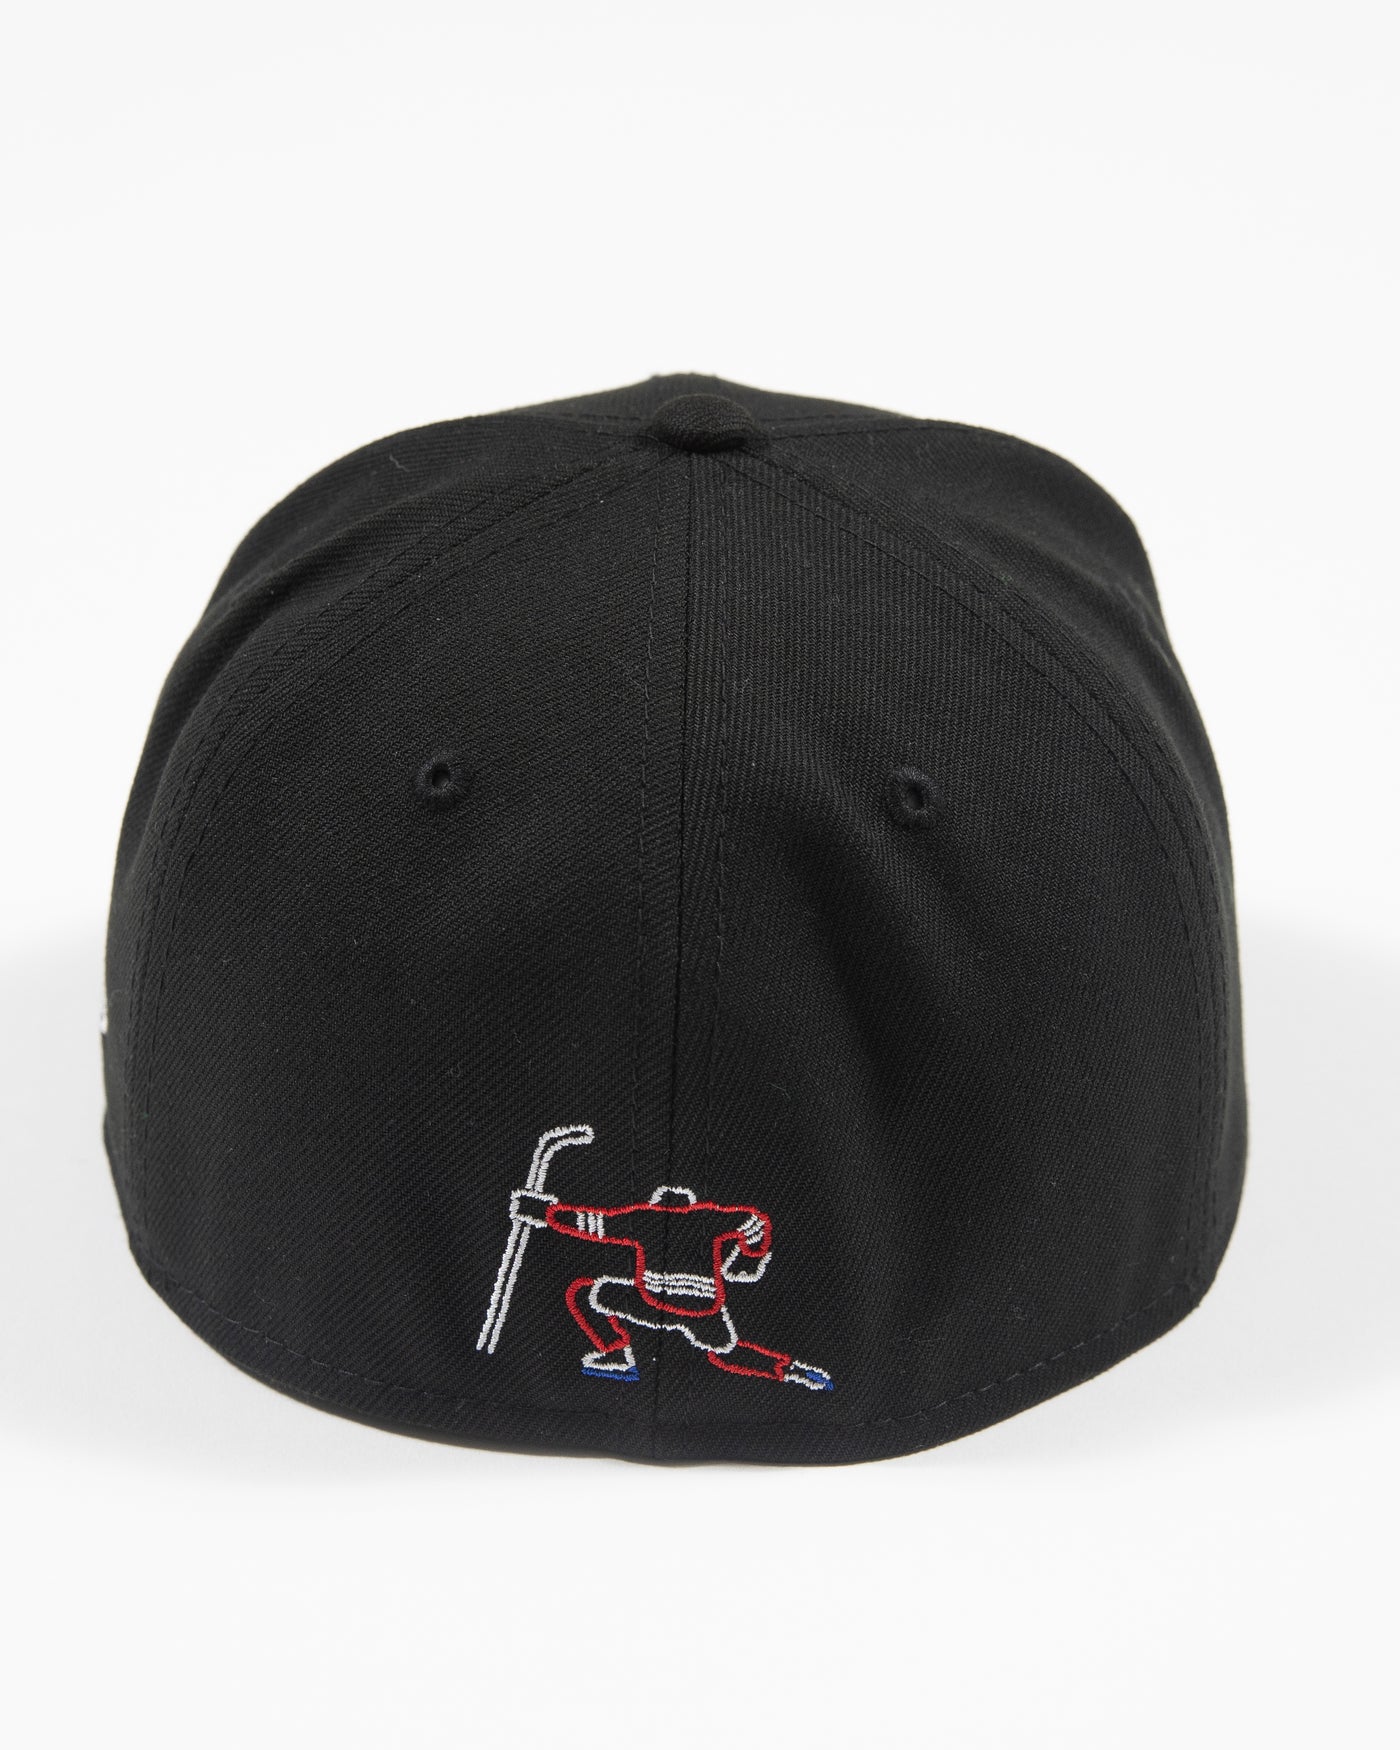 New Era black fitted hat with neon lights inspired primary logo - back view with embroidered celly decal